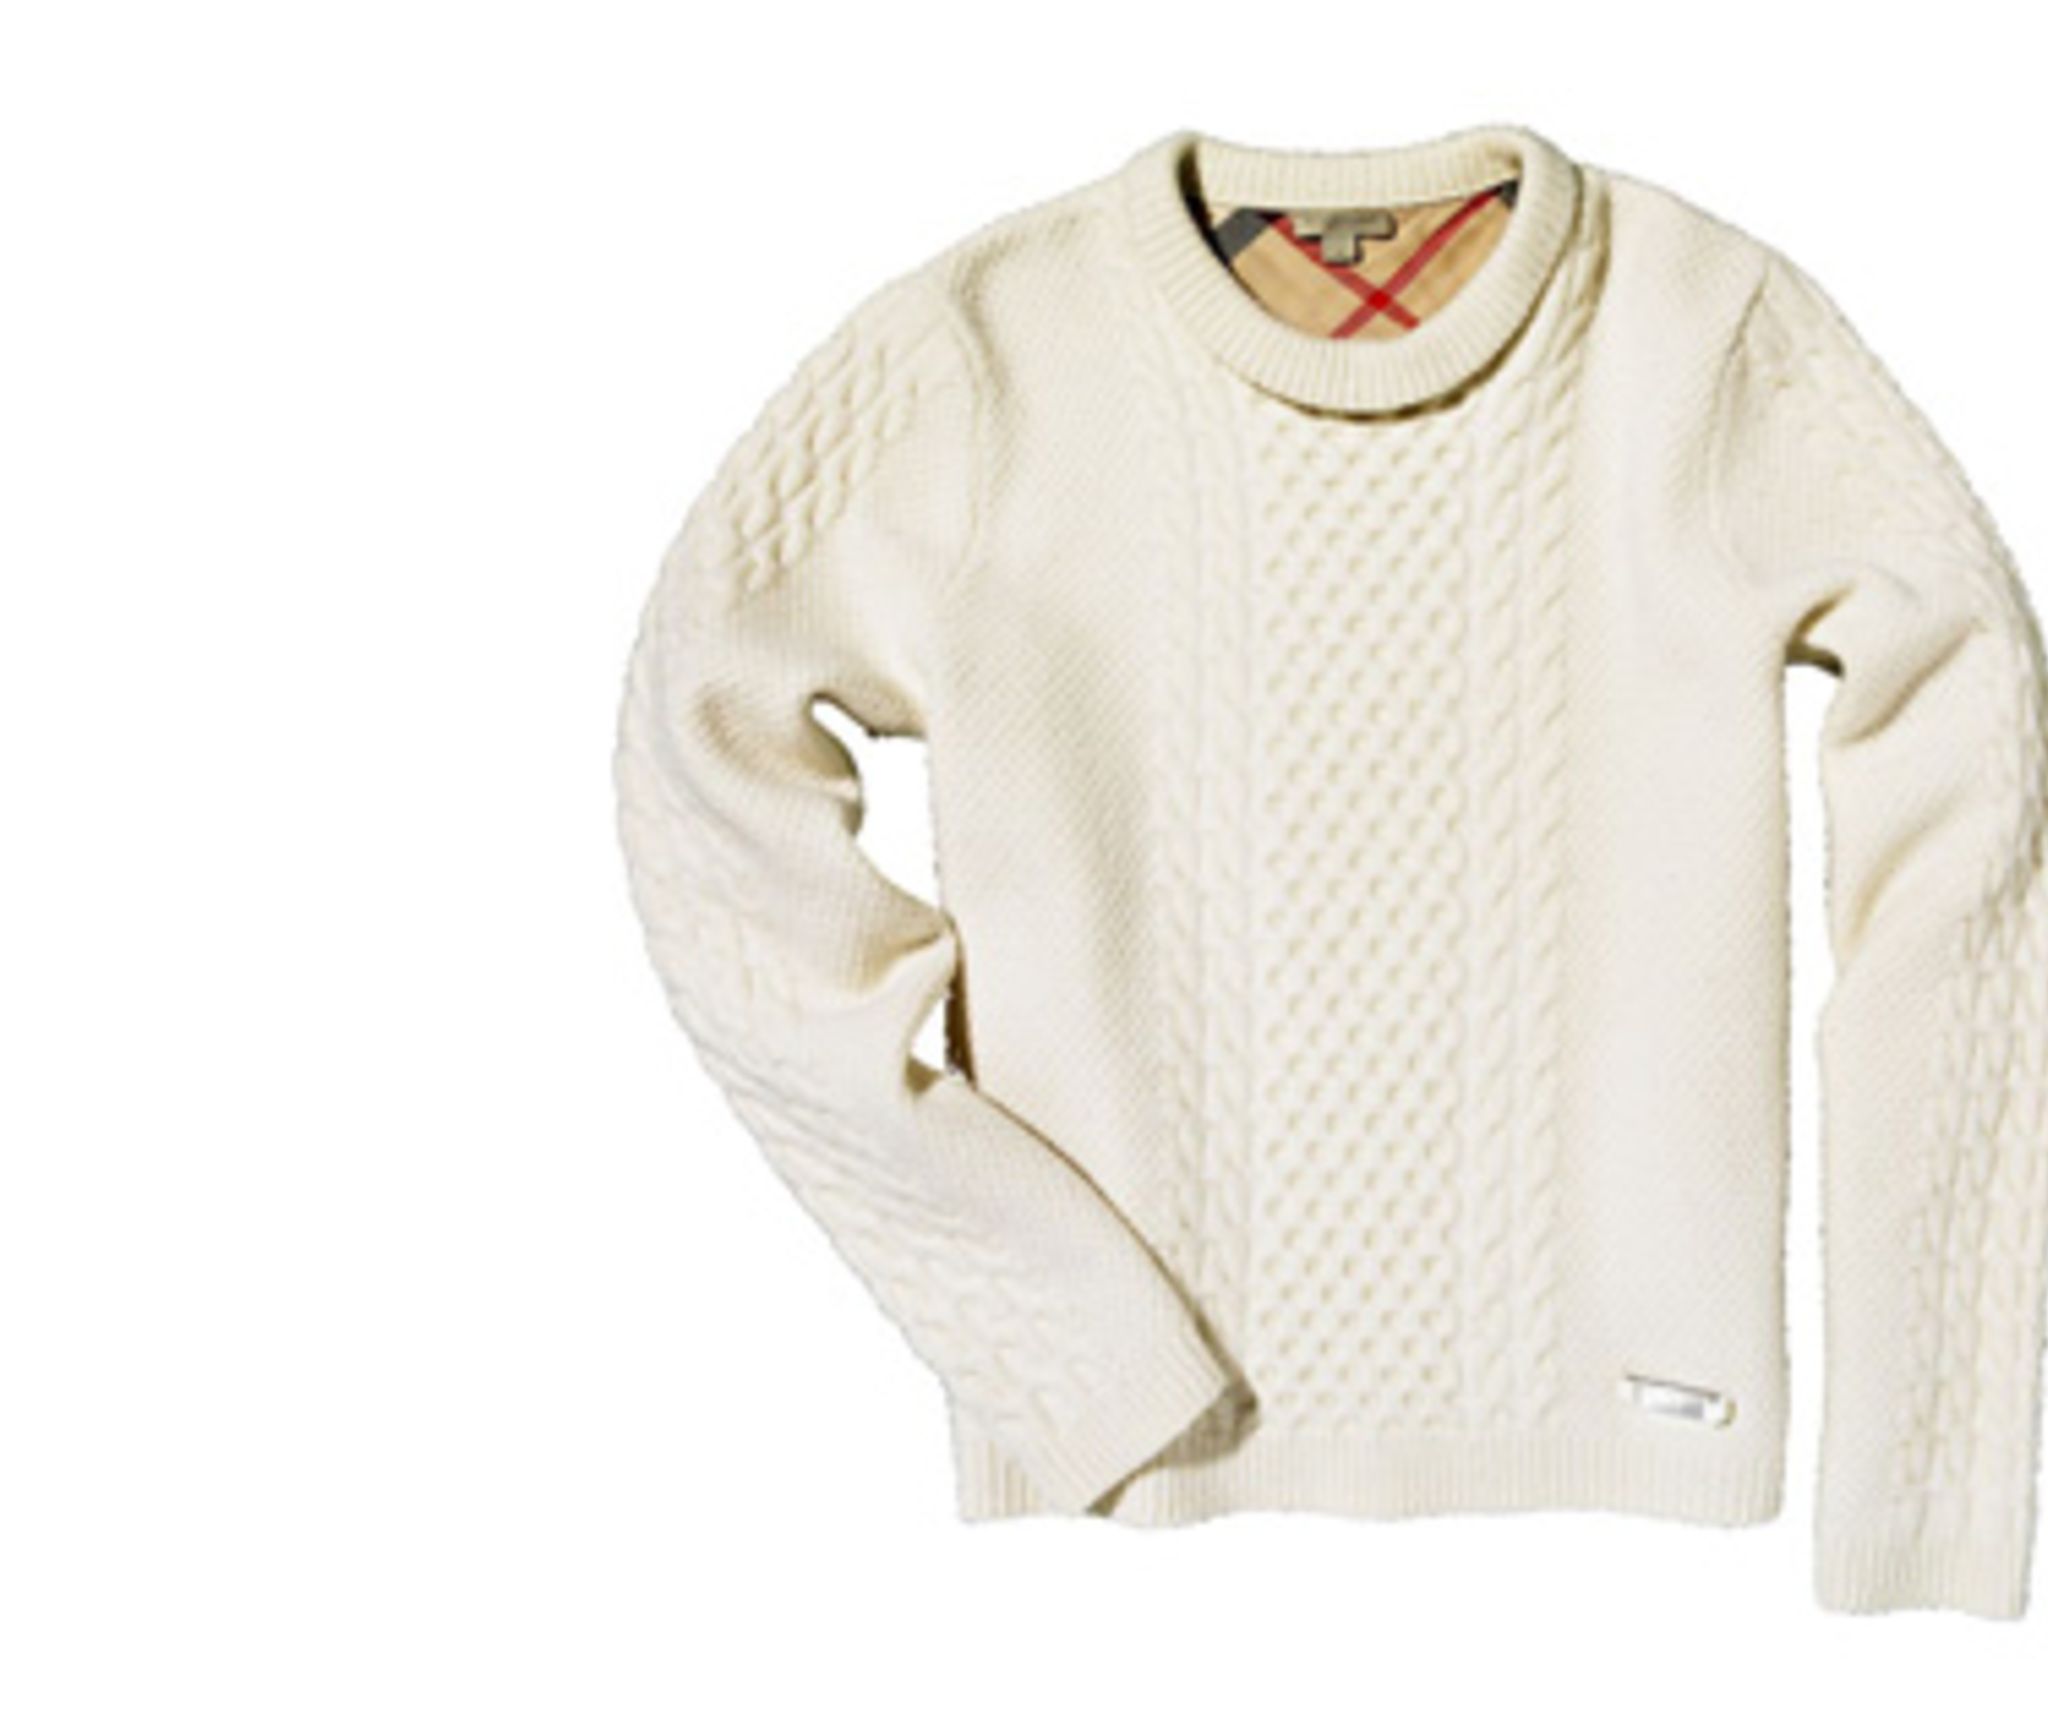 burberry knitted jumper